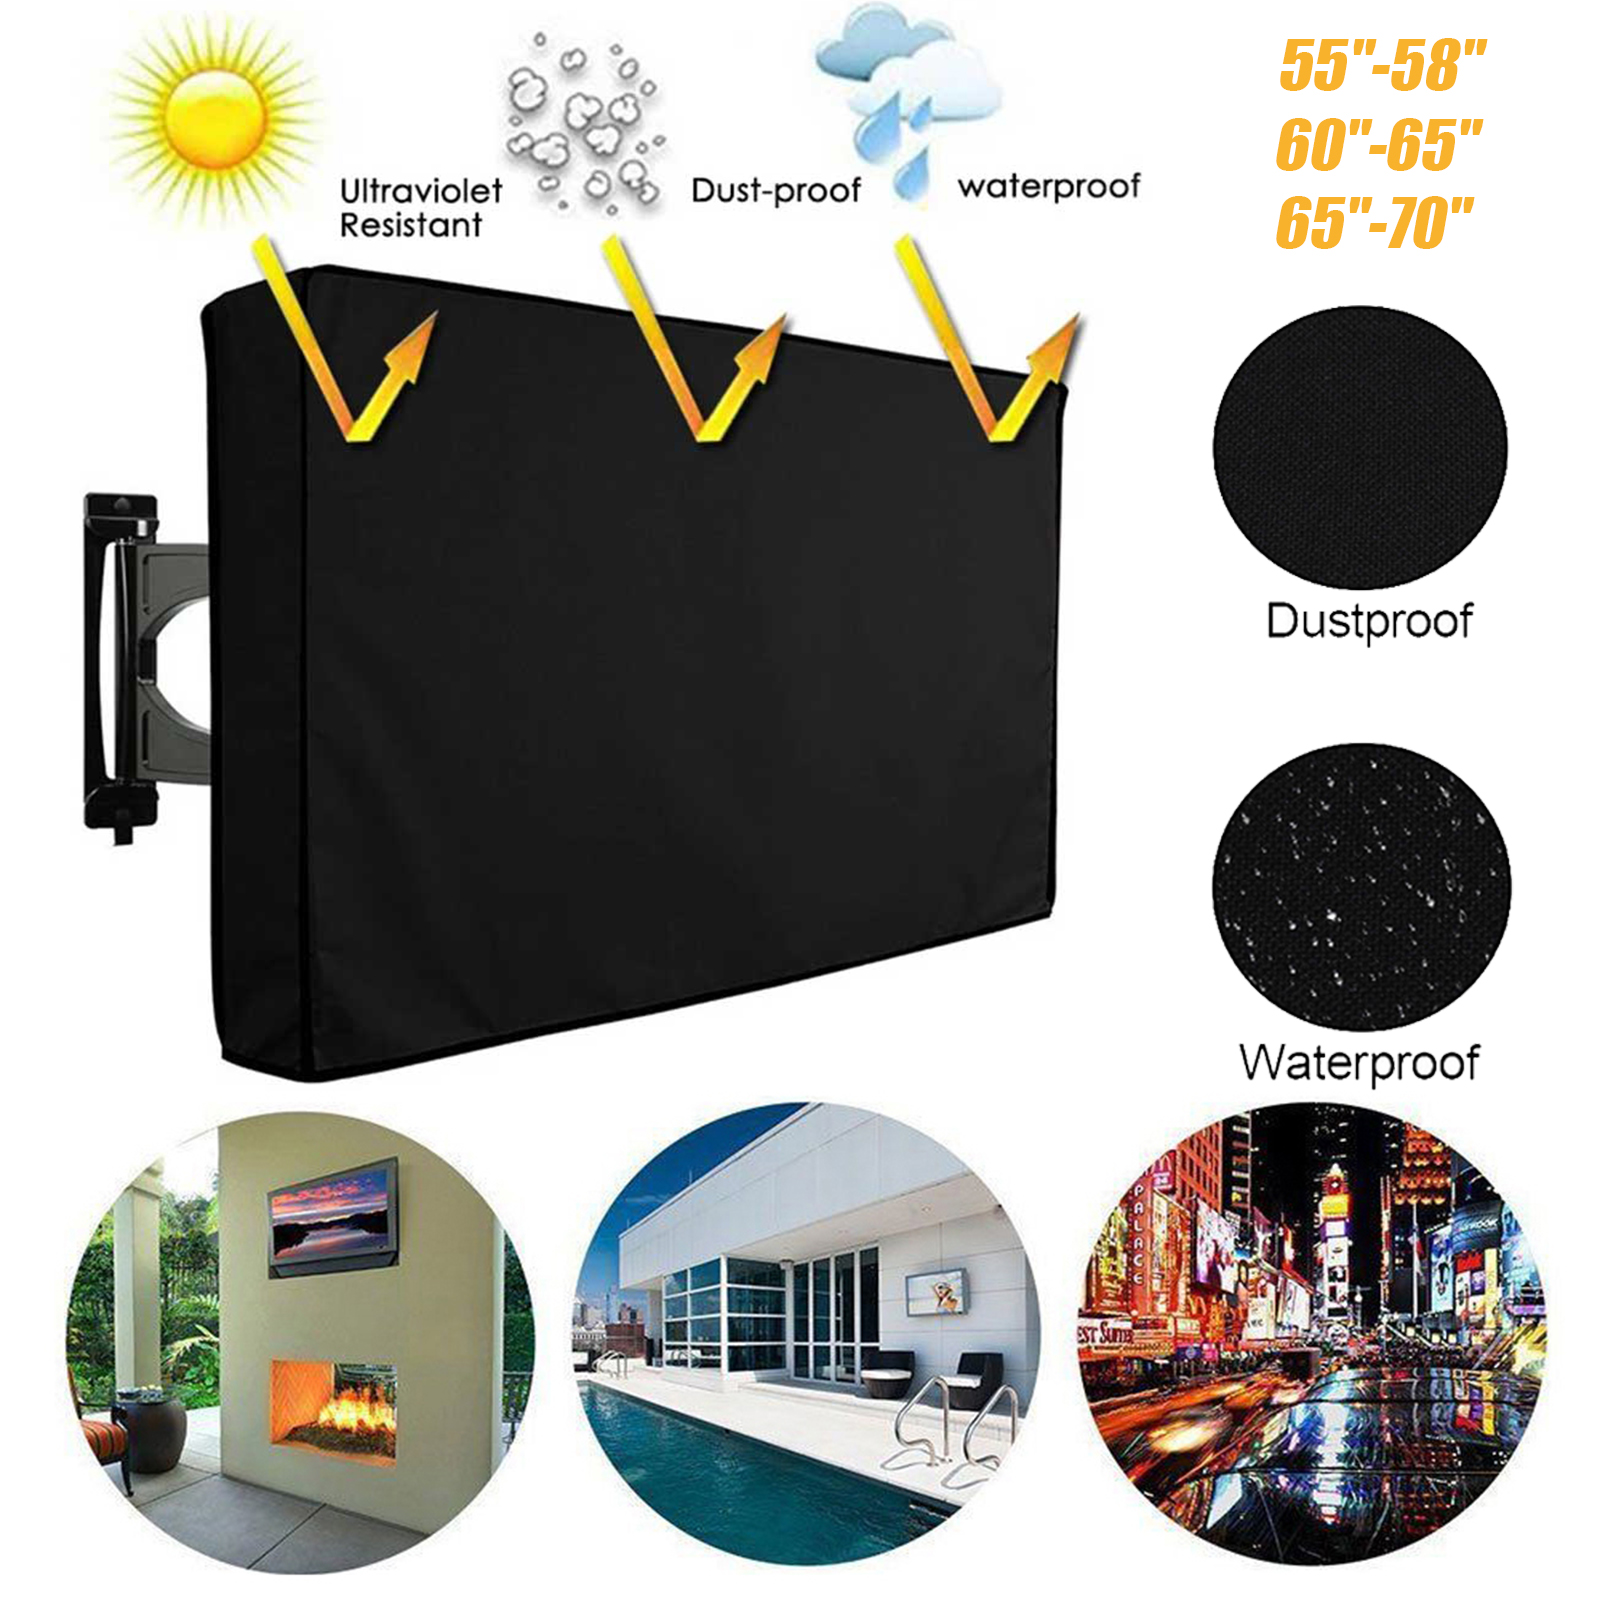 Outdoor Waterproof TV Cover Black Television Protector For 65-70 inch TV 40*64*5in